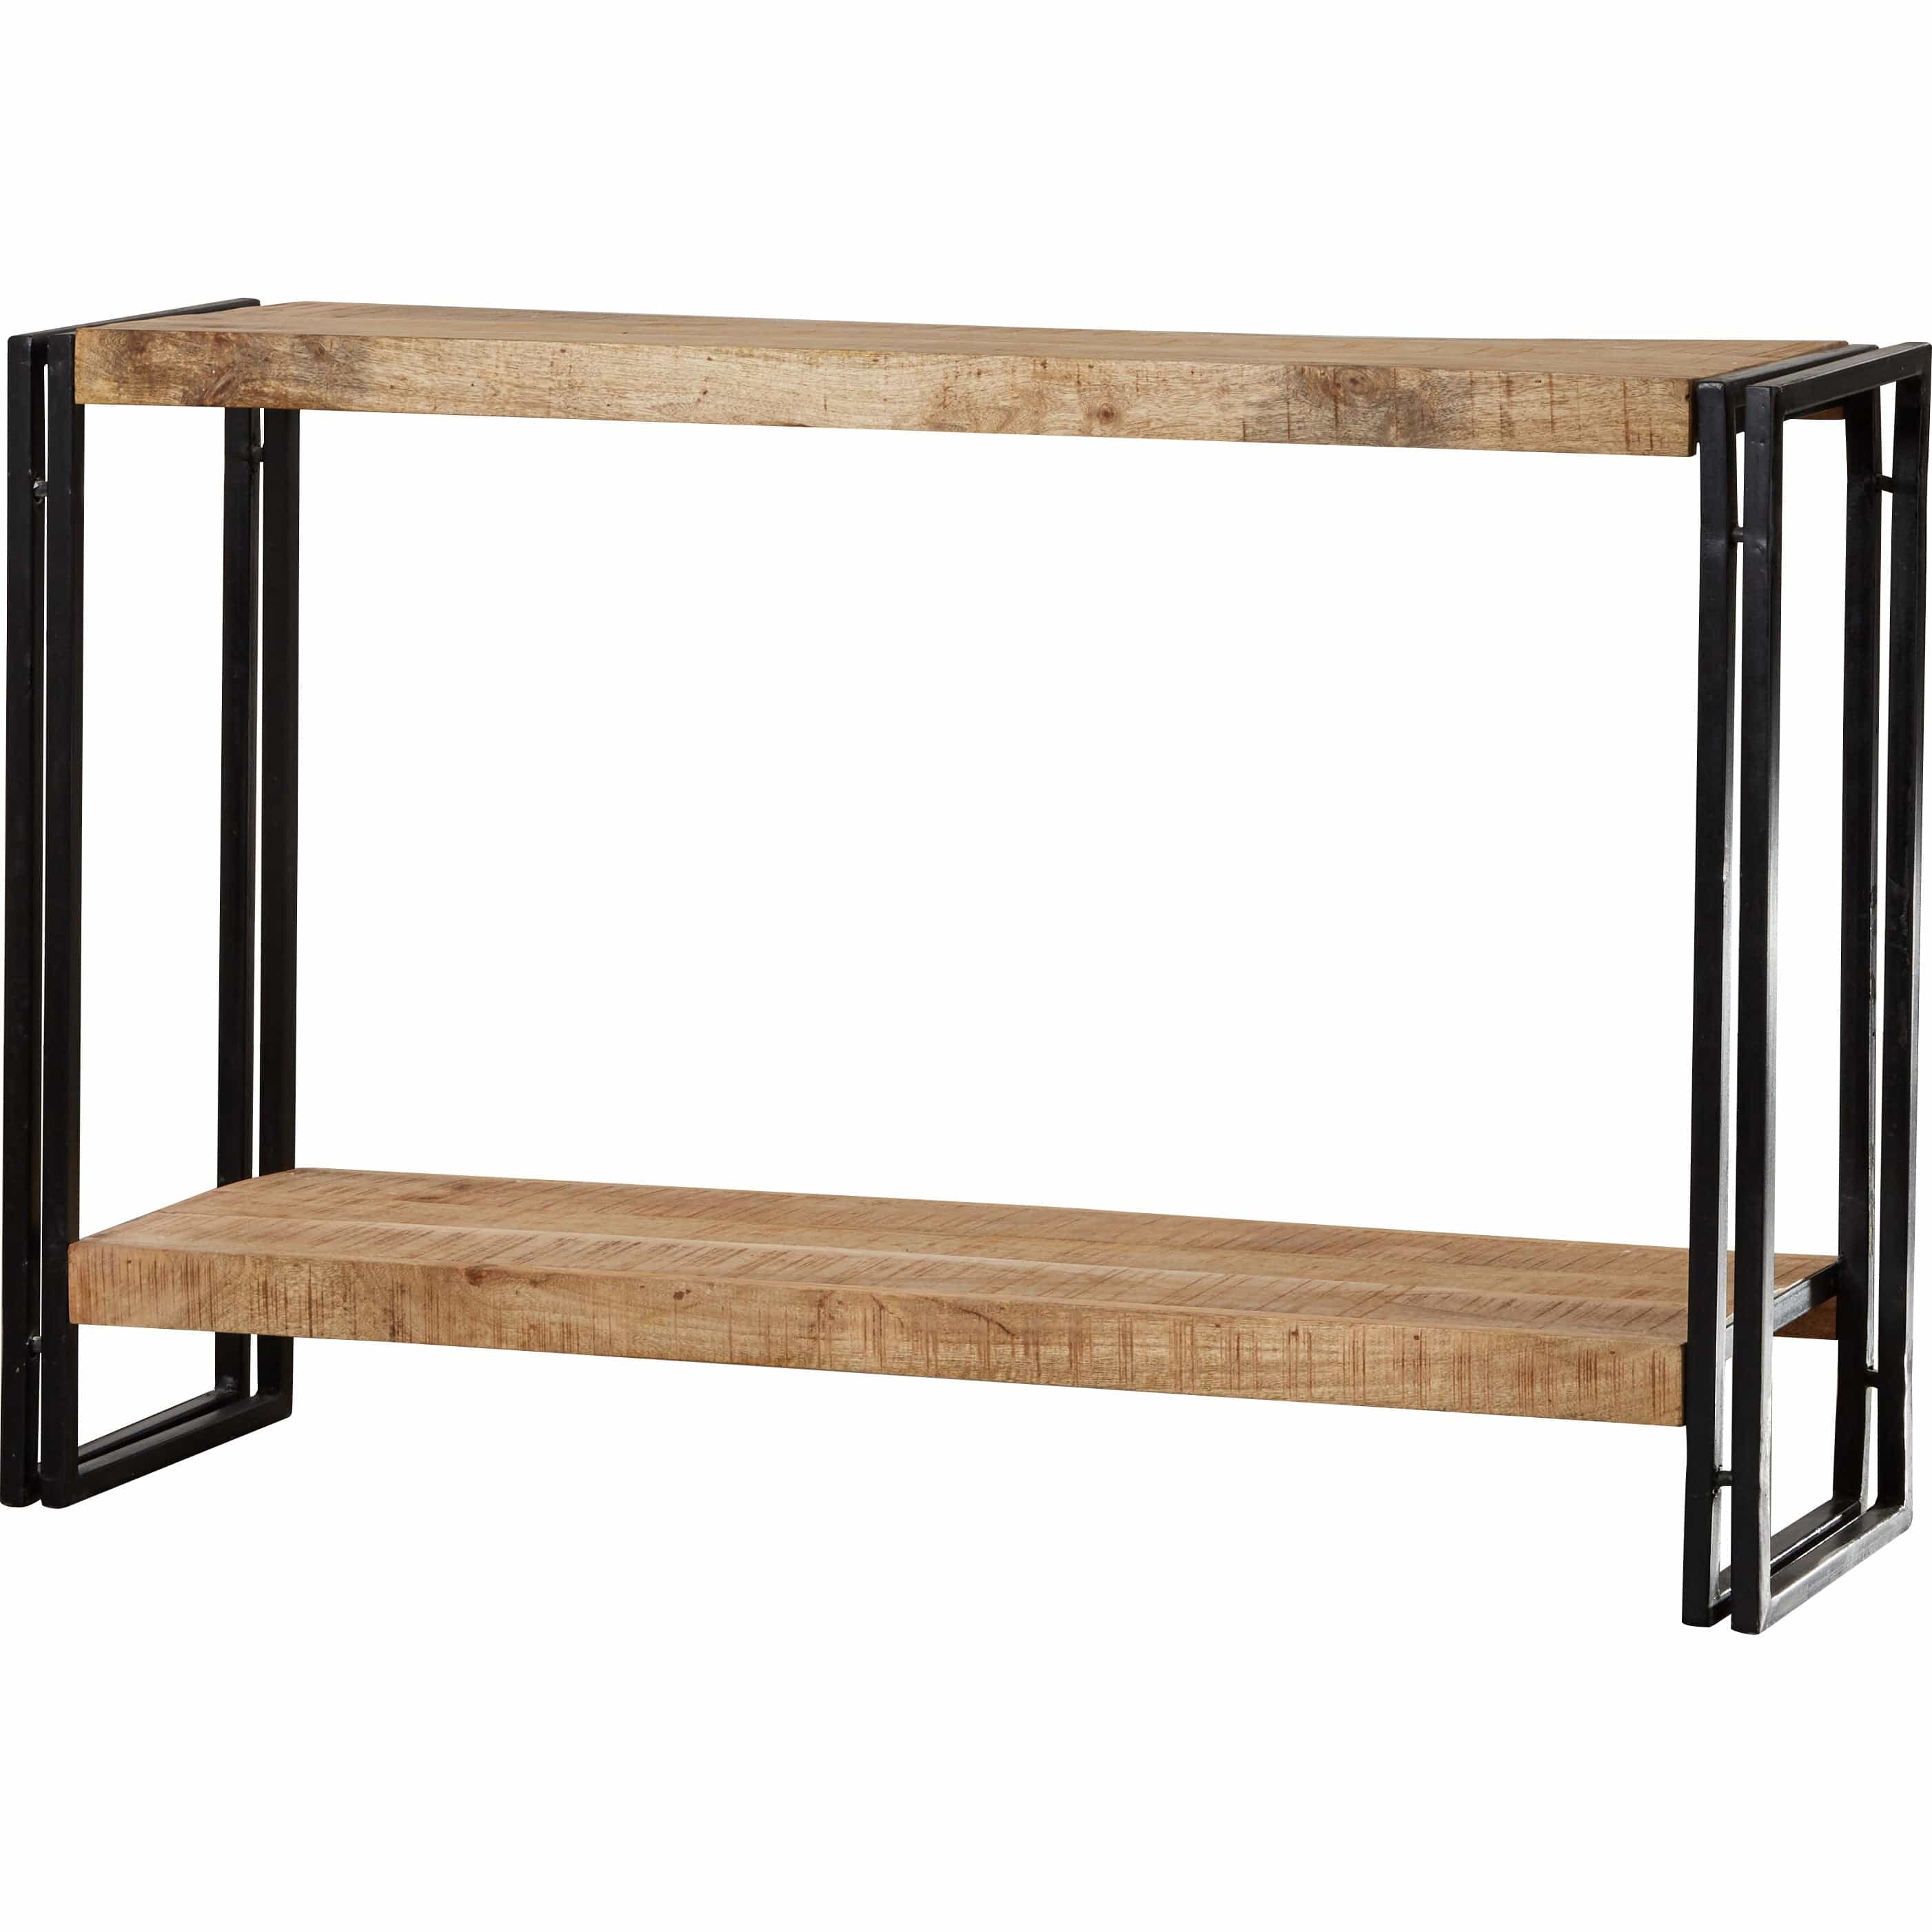 oft raw mango wood and reclaimed metal industrial console table with 2 shelves | MalletandPlane.com